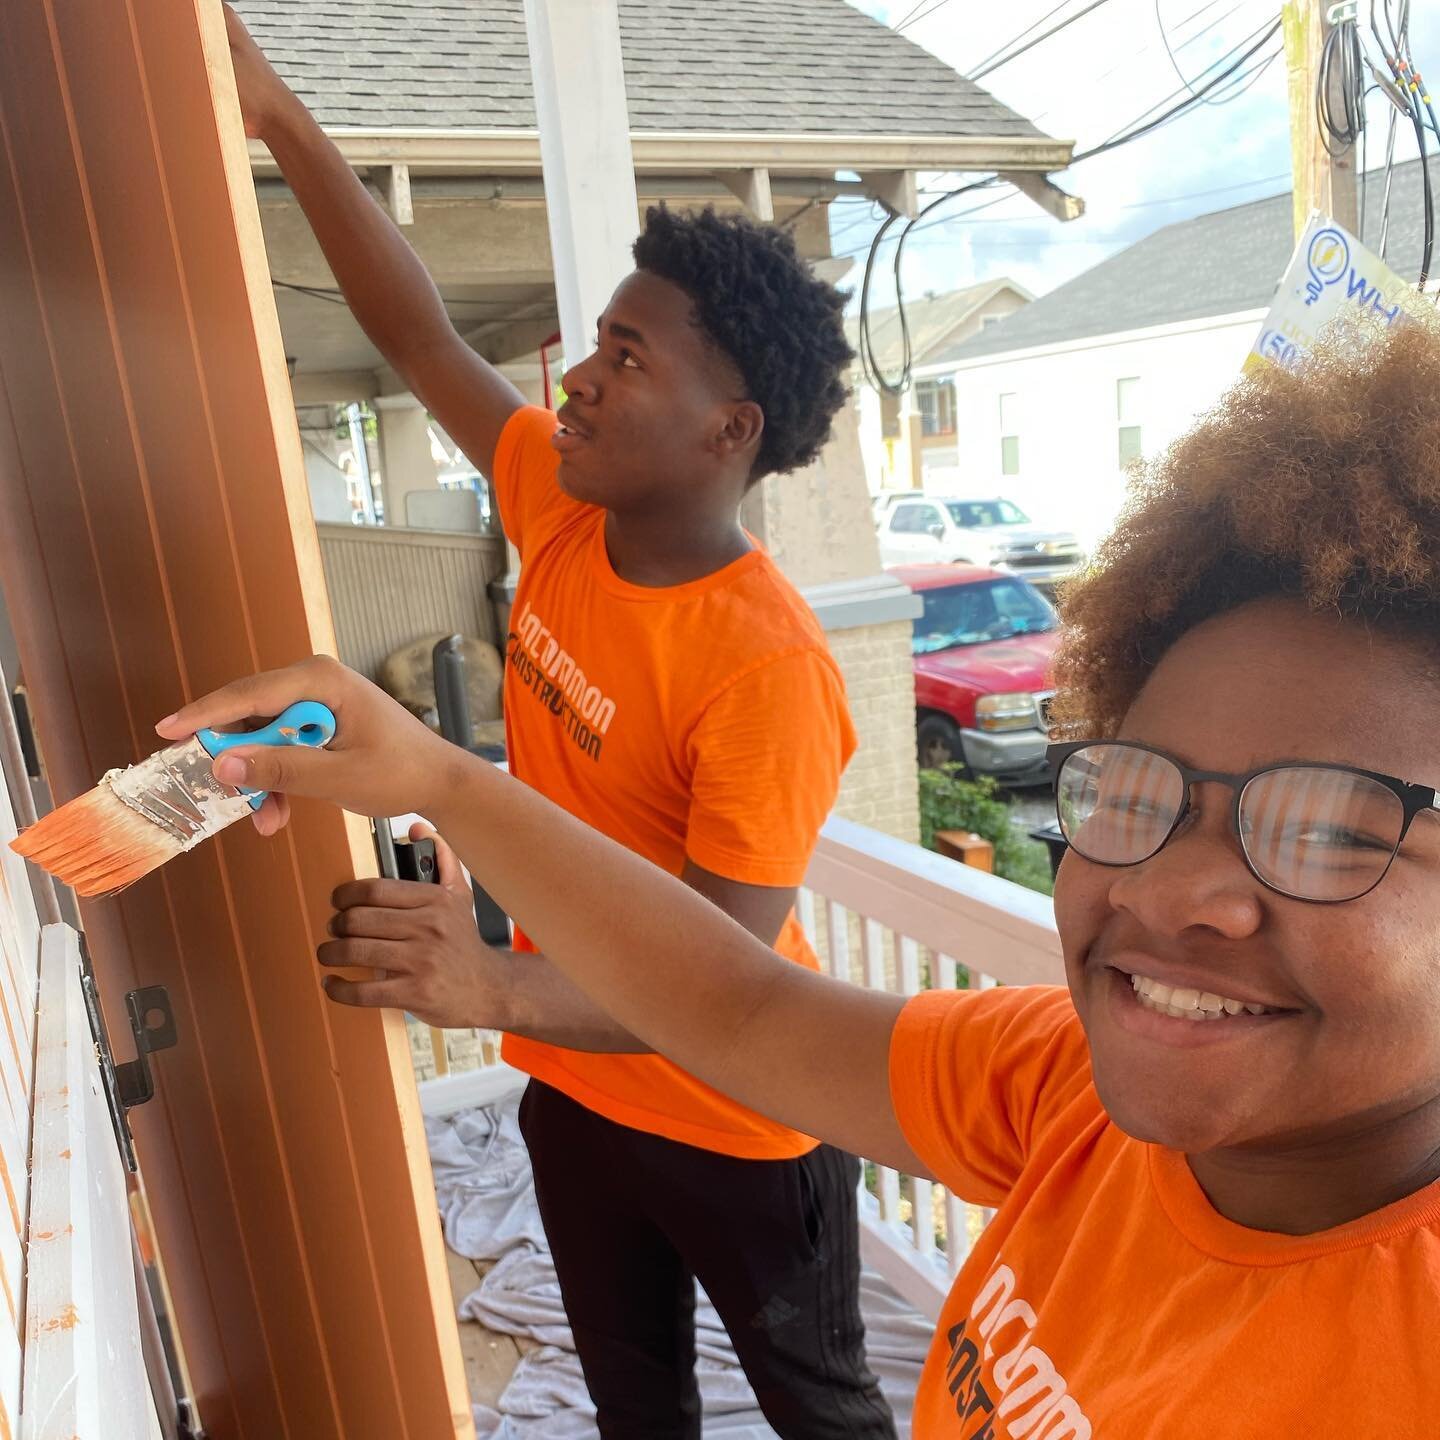 It&rsquo;s a great day to add some accent color to the house! Apprentices are out in this heat #painting the handrails and shutters for the latest unCommon House!

#Teamwork #NewOrleansRealEstate #BuildingHousesFramingCharacter